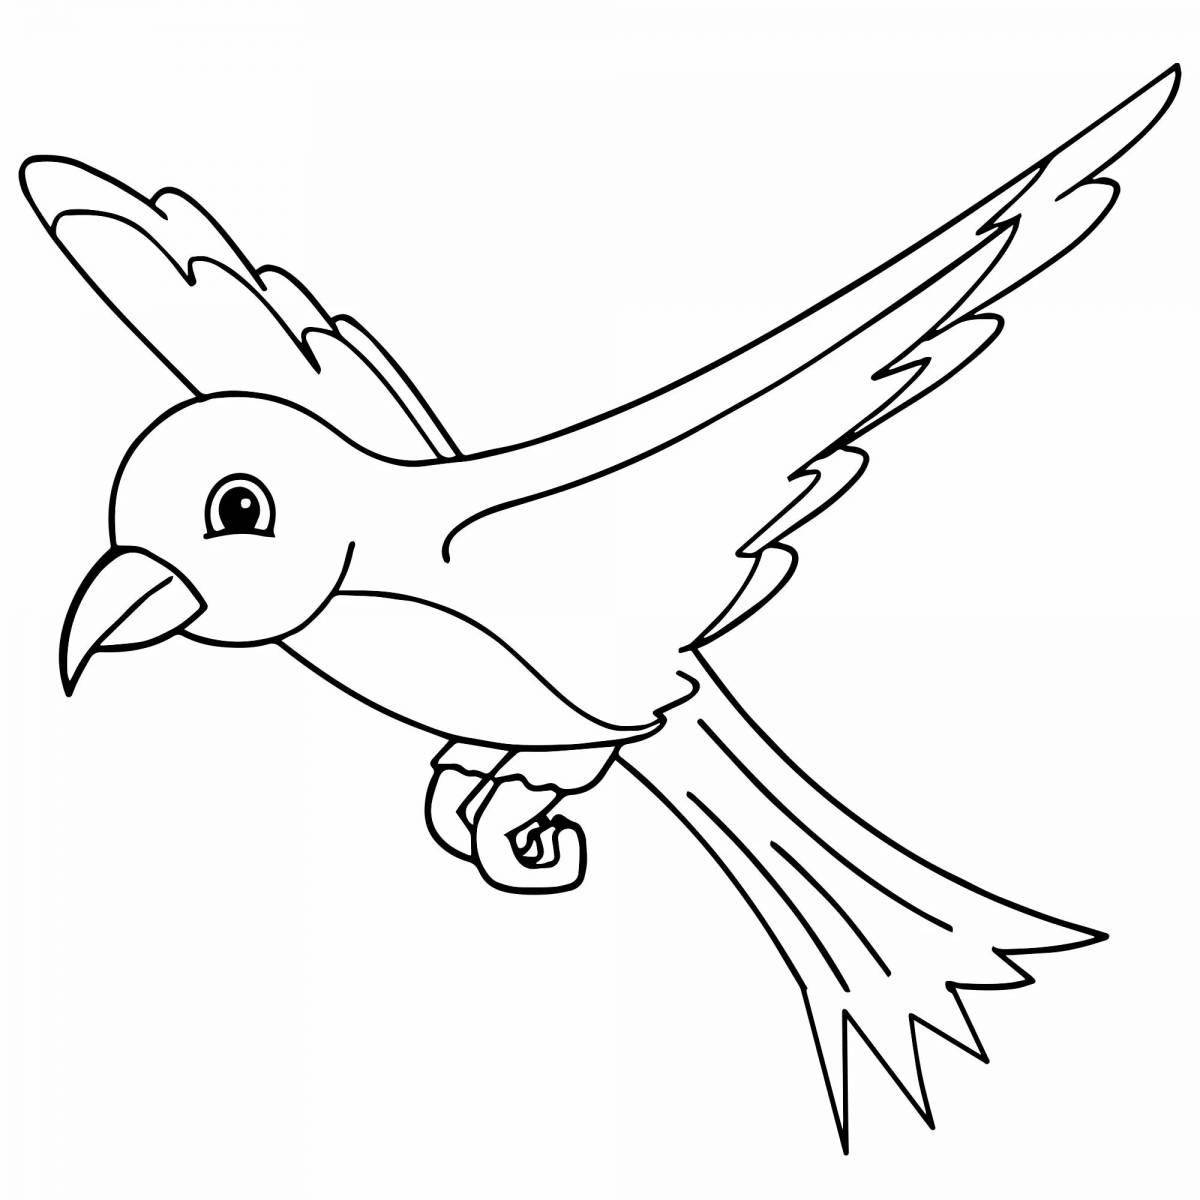 Exotic flying bird coloring page